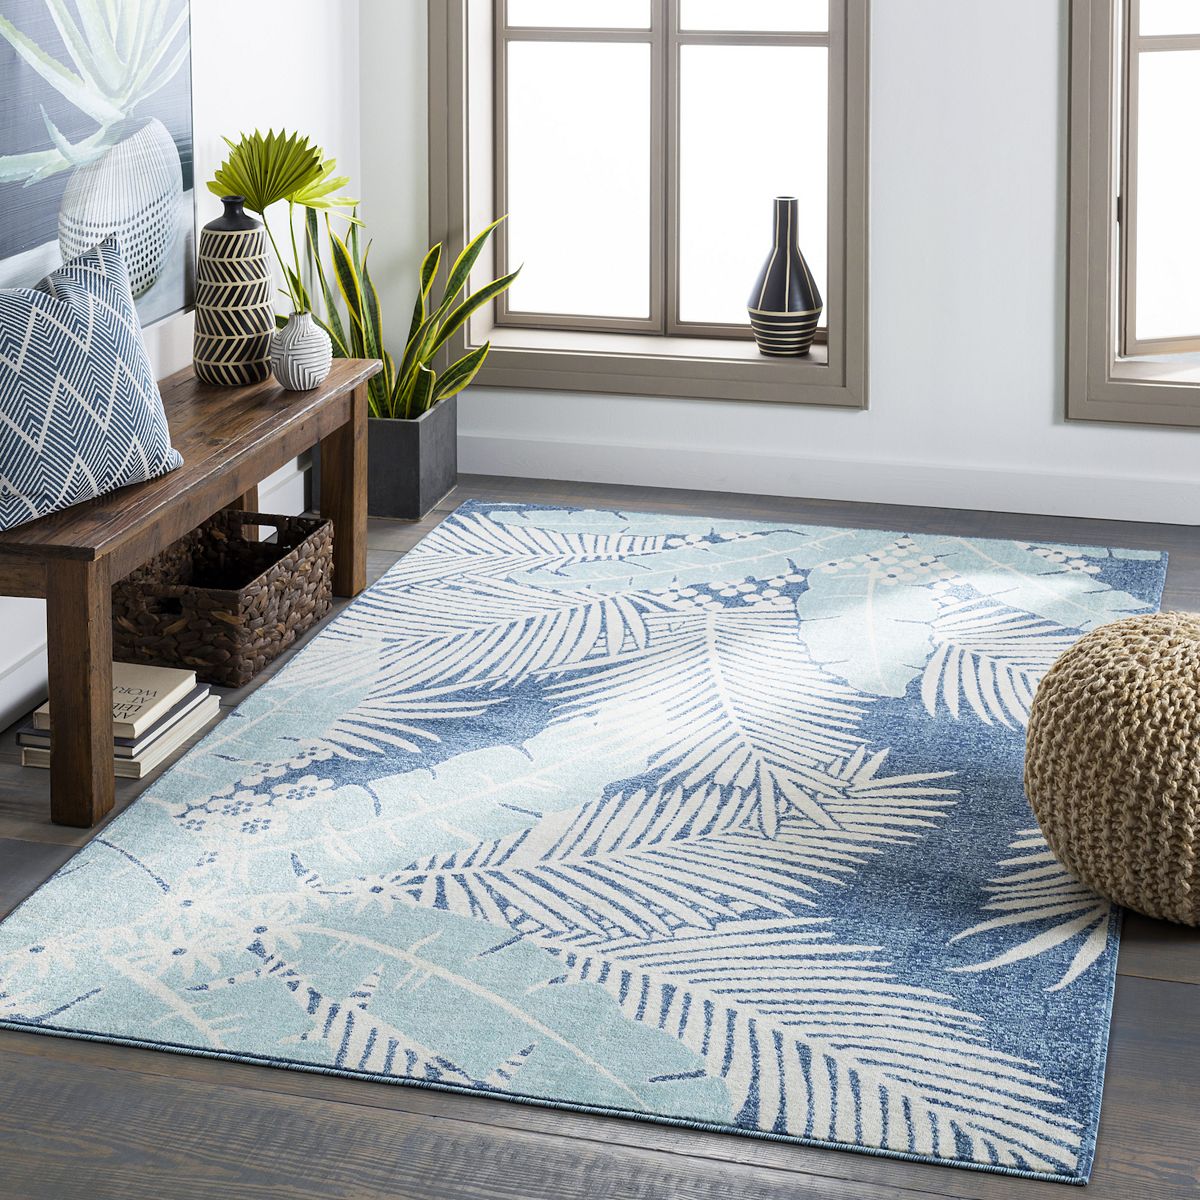 Blue and seafoam green palm leaf area rug from Kohls